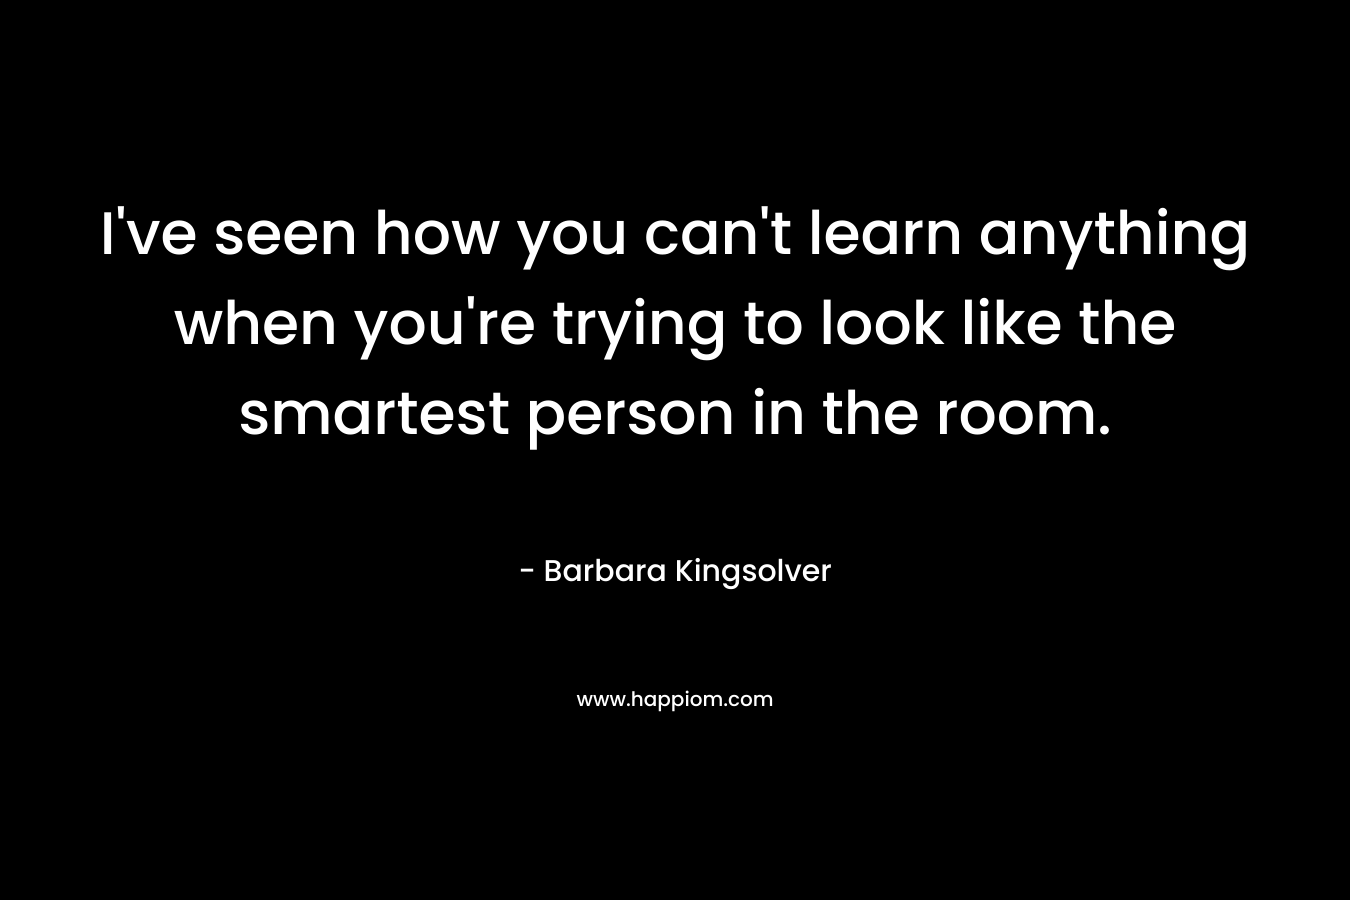 I've seen how you can't learn anything when you're trying to look like the smartest person in the room.